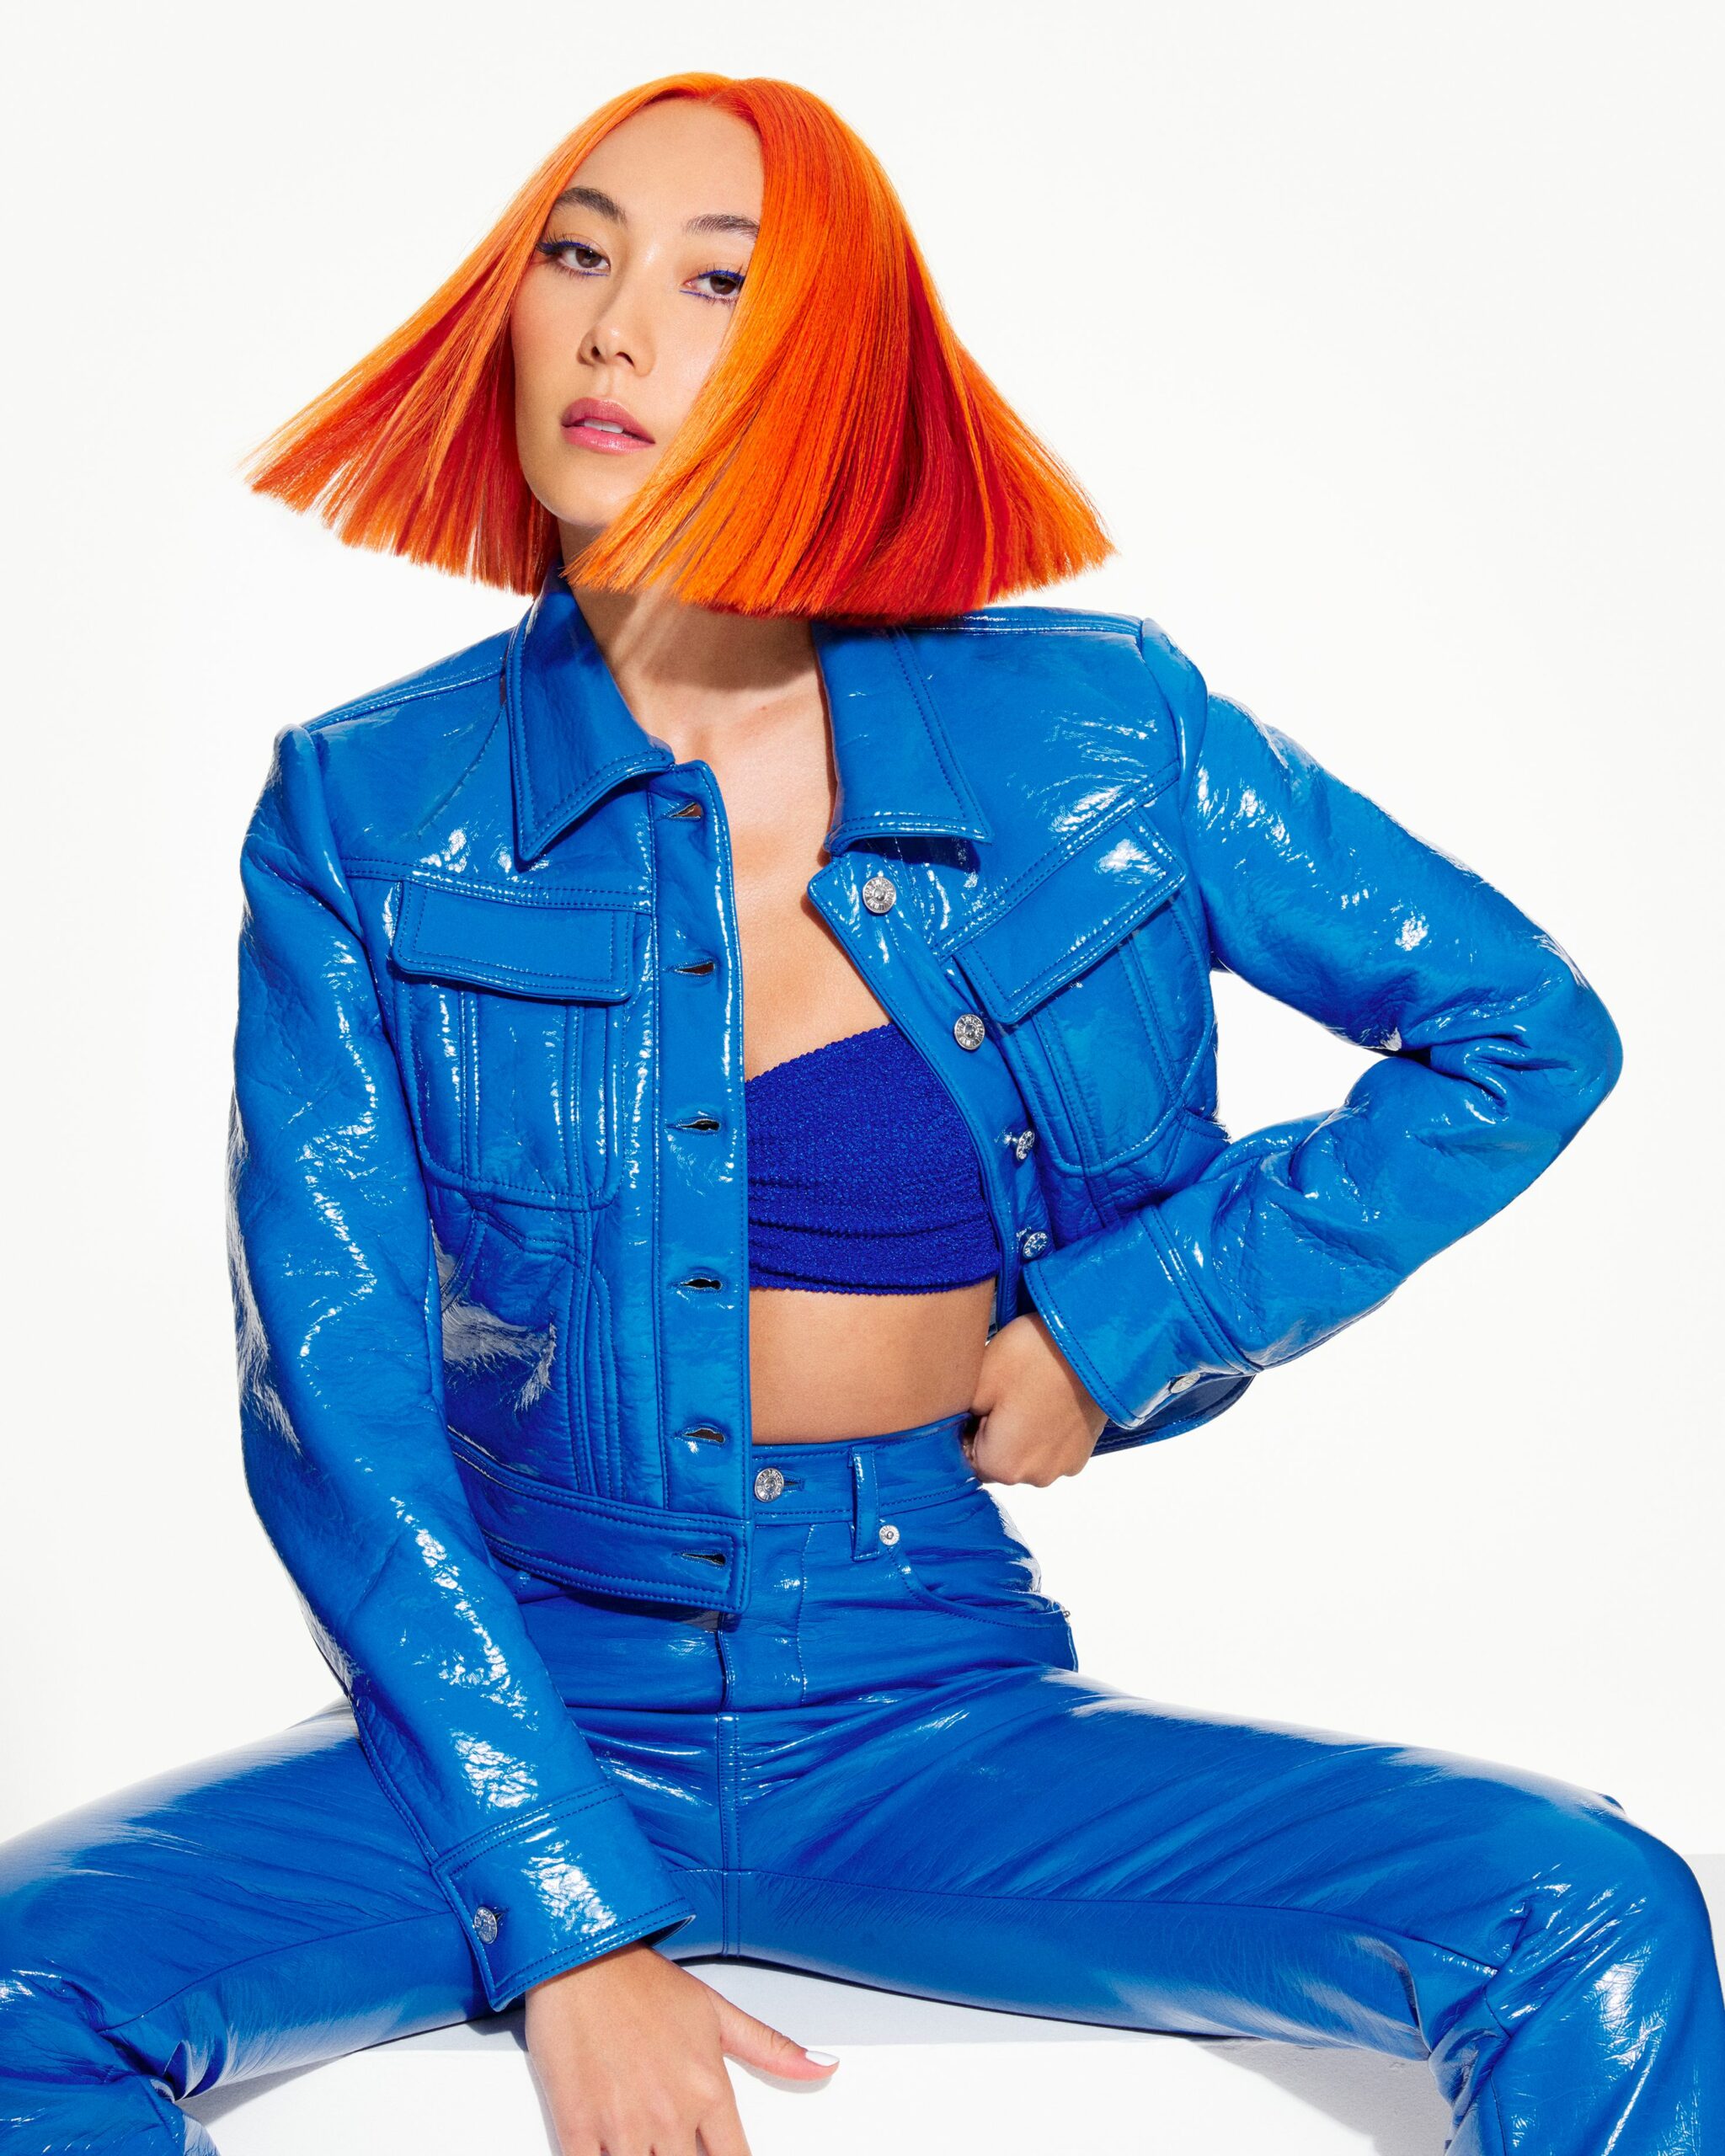 Wella Model with orange hair cut into a bob shape wearing a blue outfit.